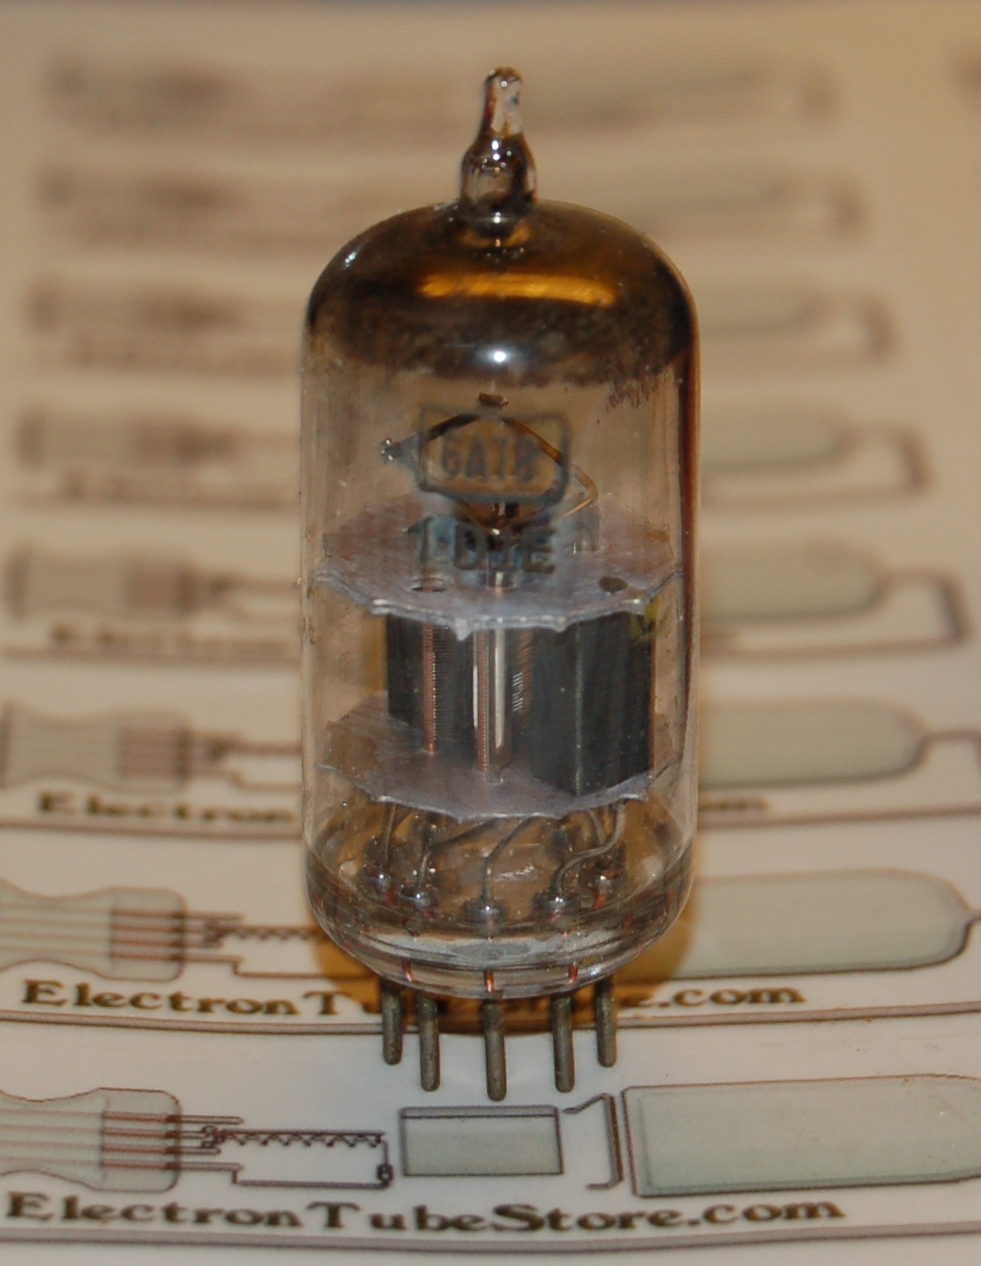 6AT8 triode and pentode tube